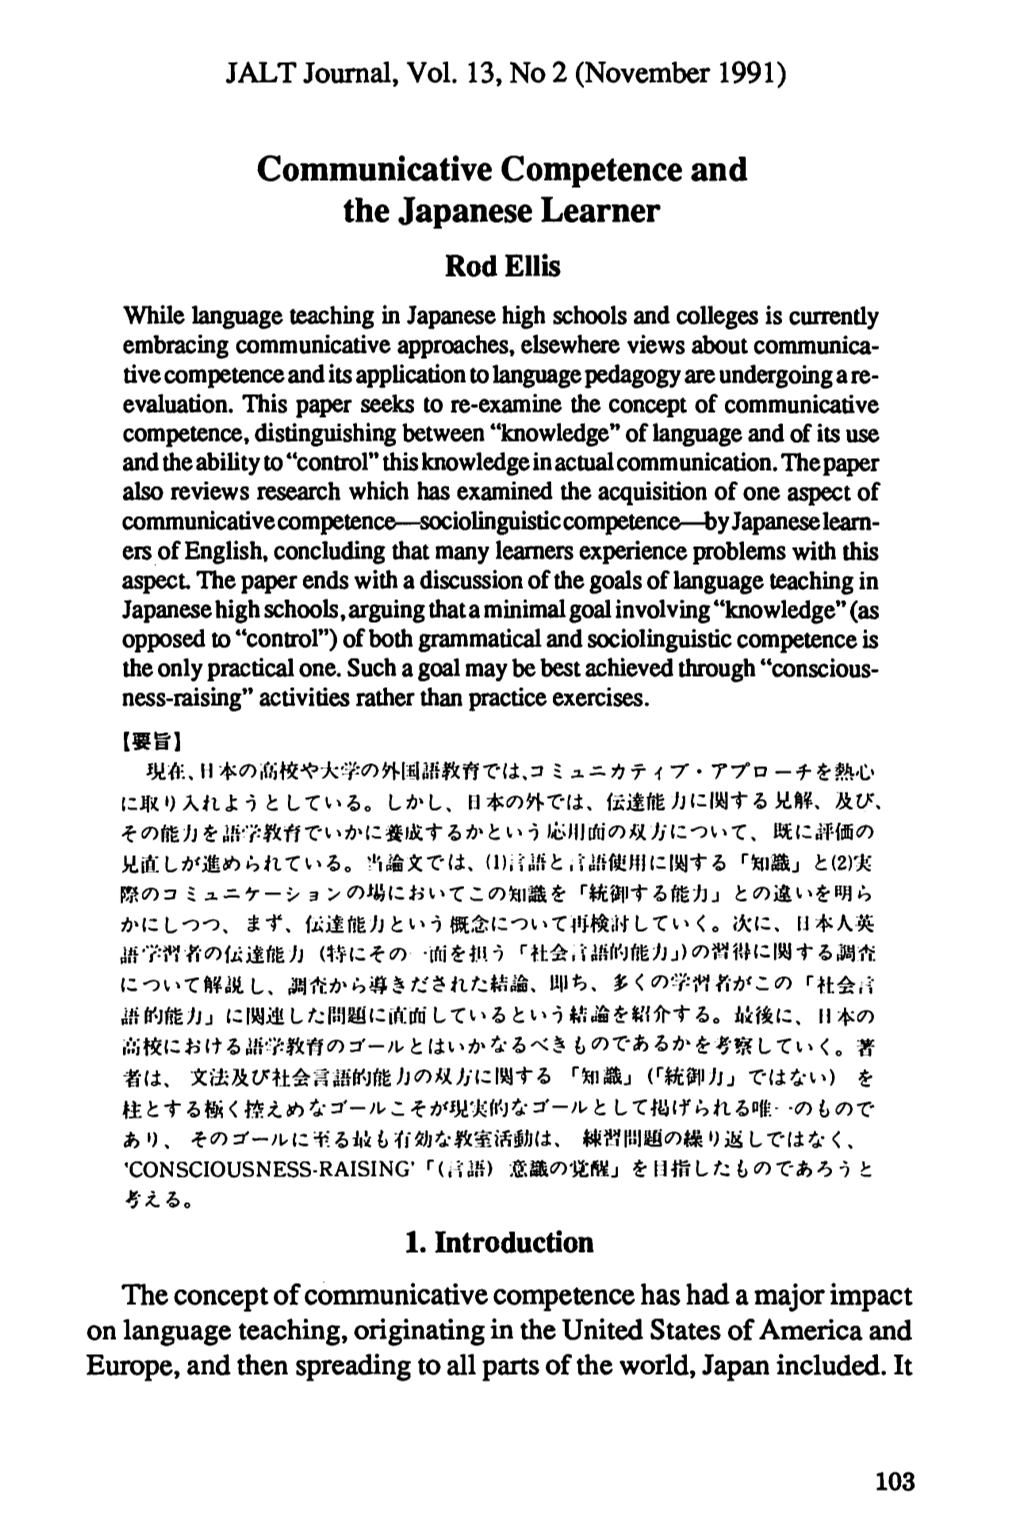 Communicative Competence and the Japanese Learner